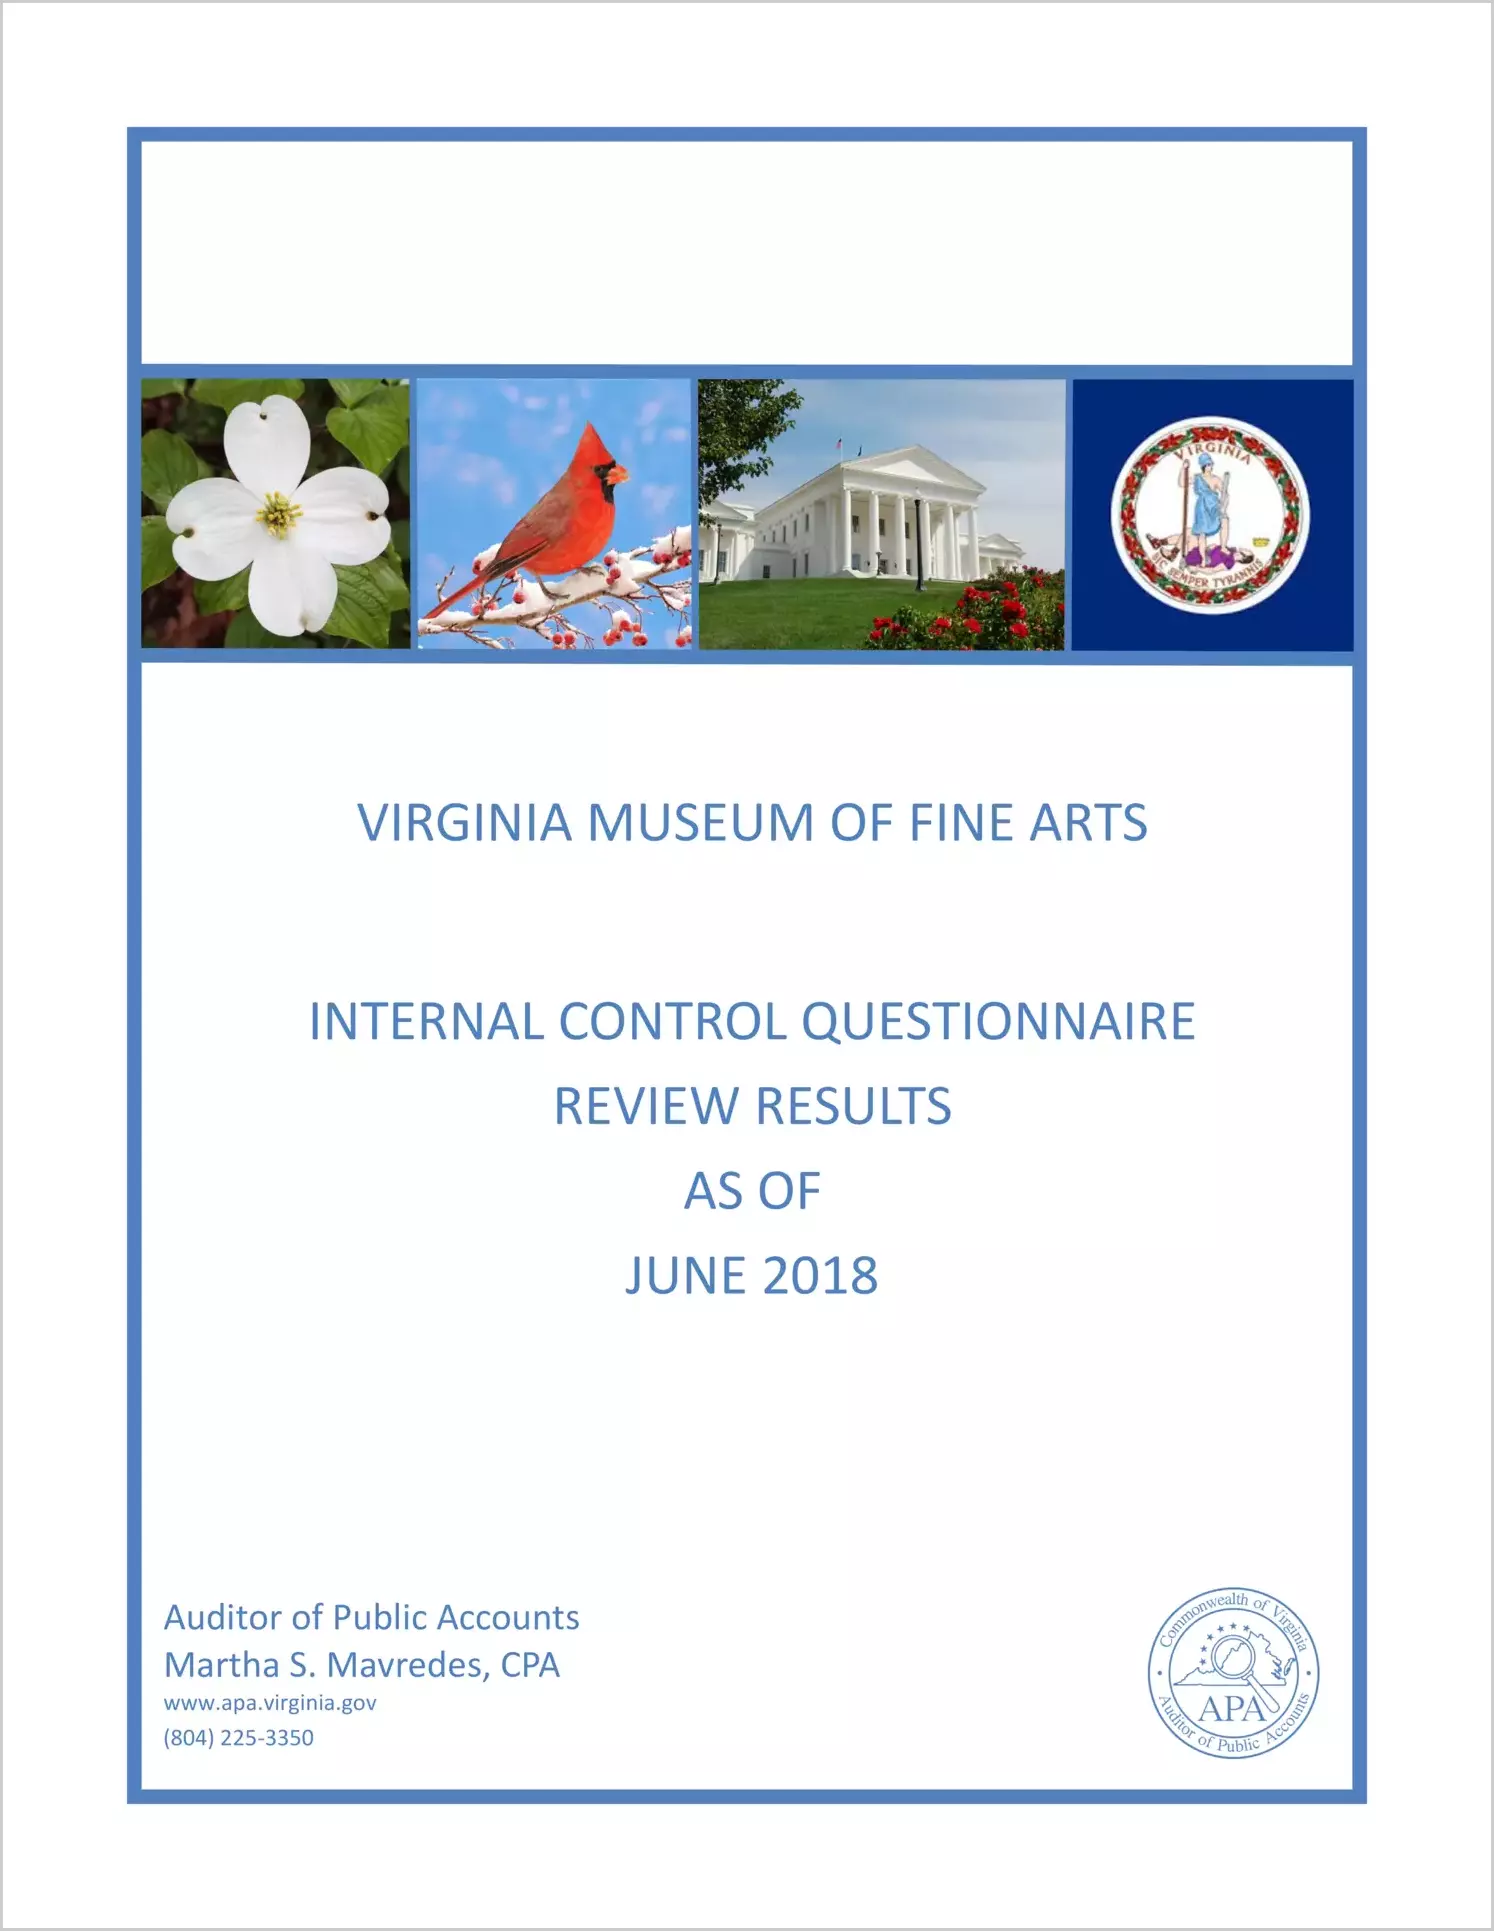 Virginia Museum of Fine Arts Internal Control Questionnaire Review Results as of June 2018